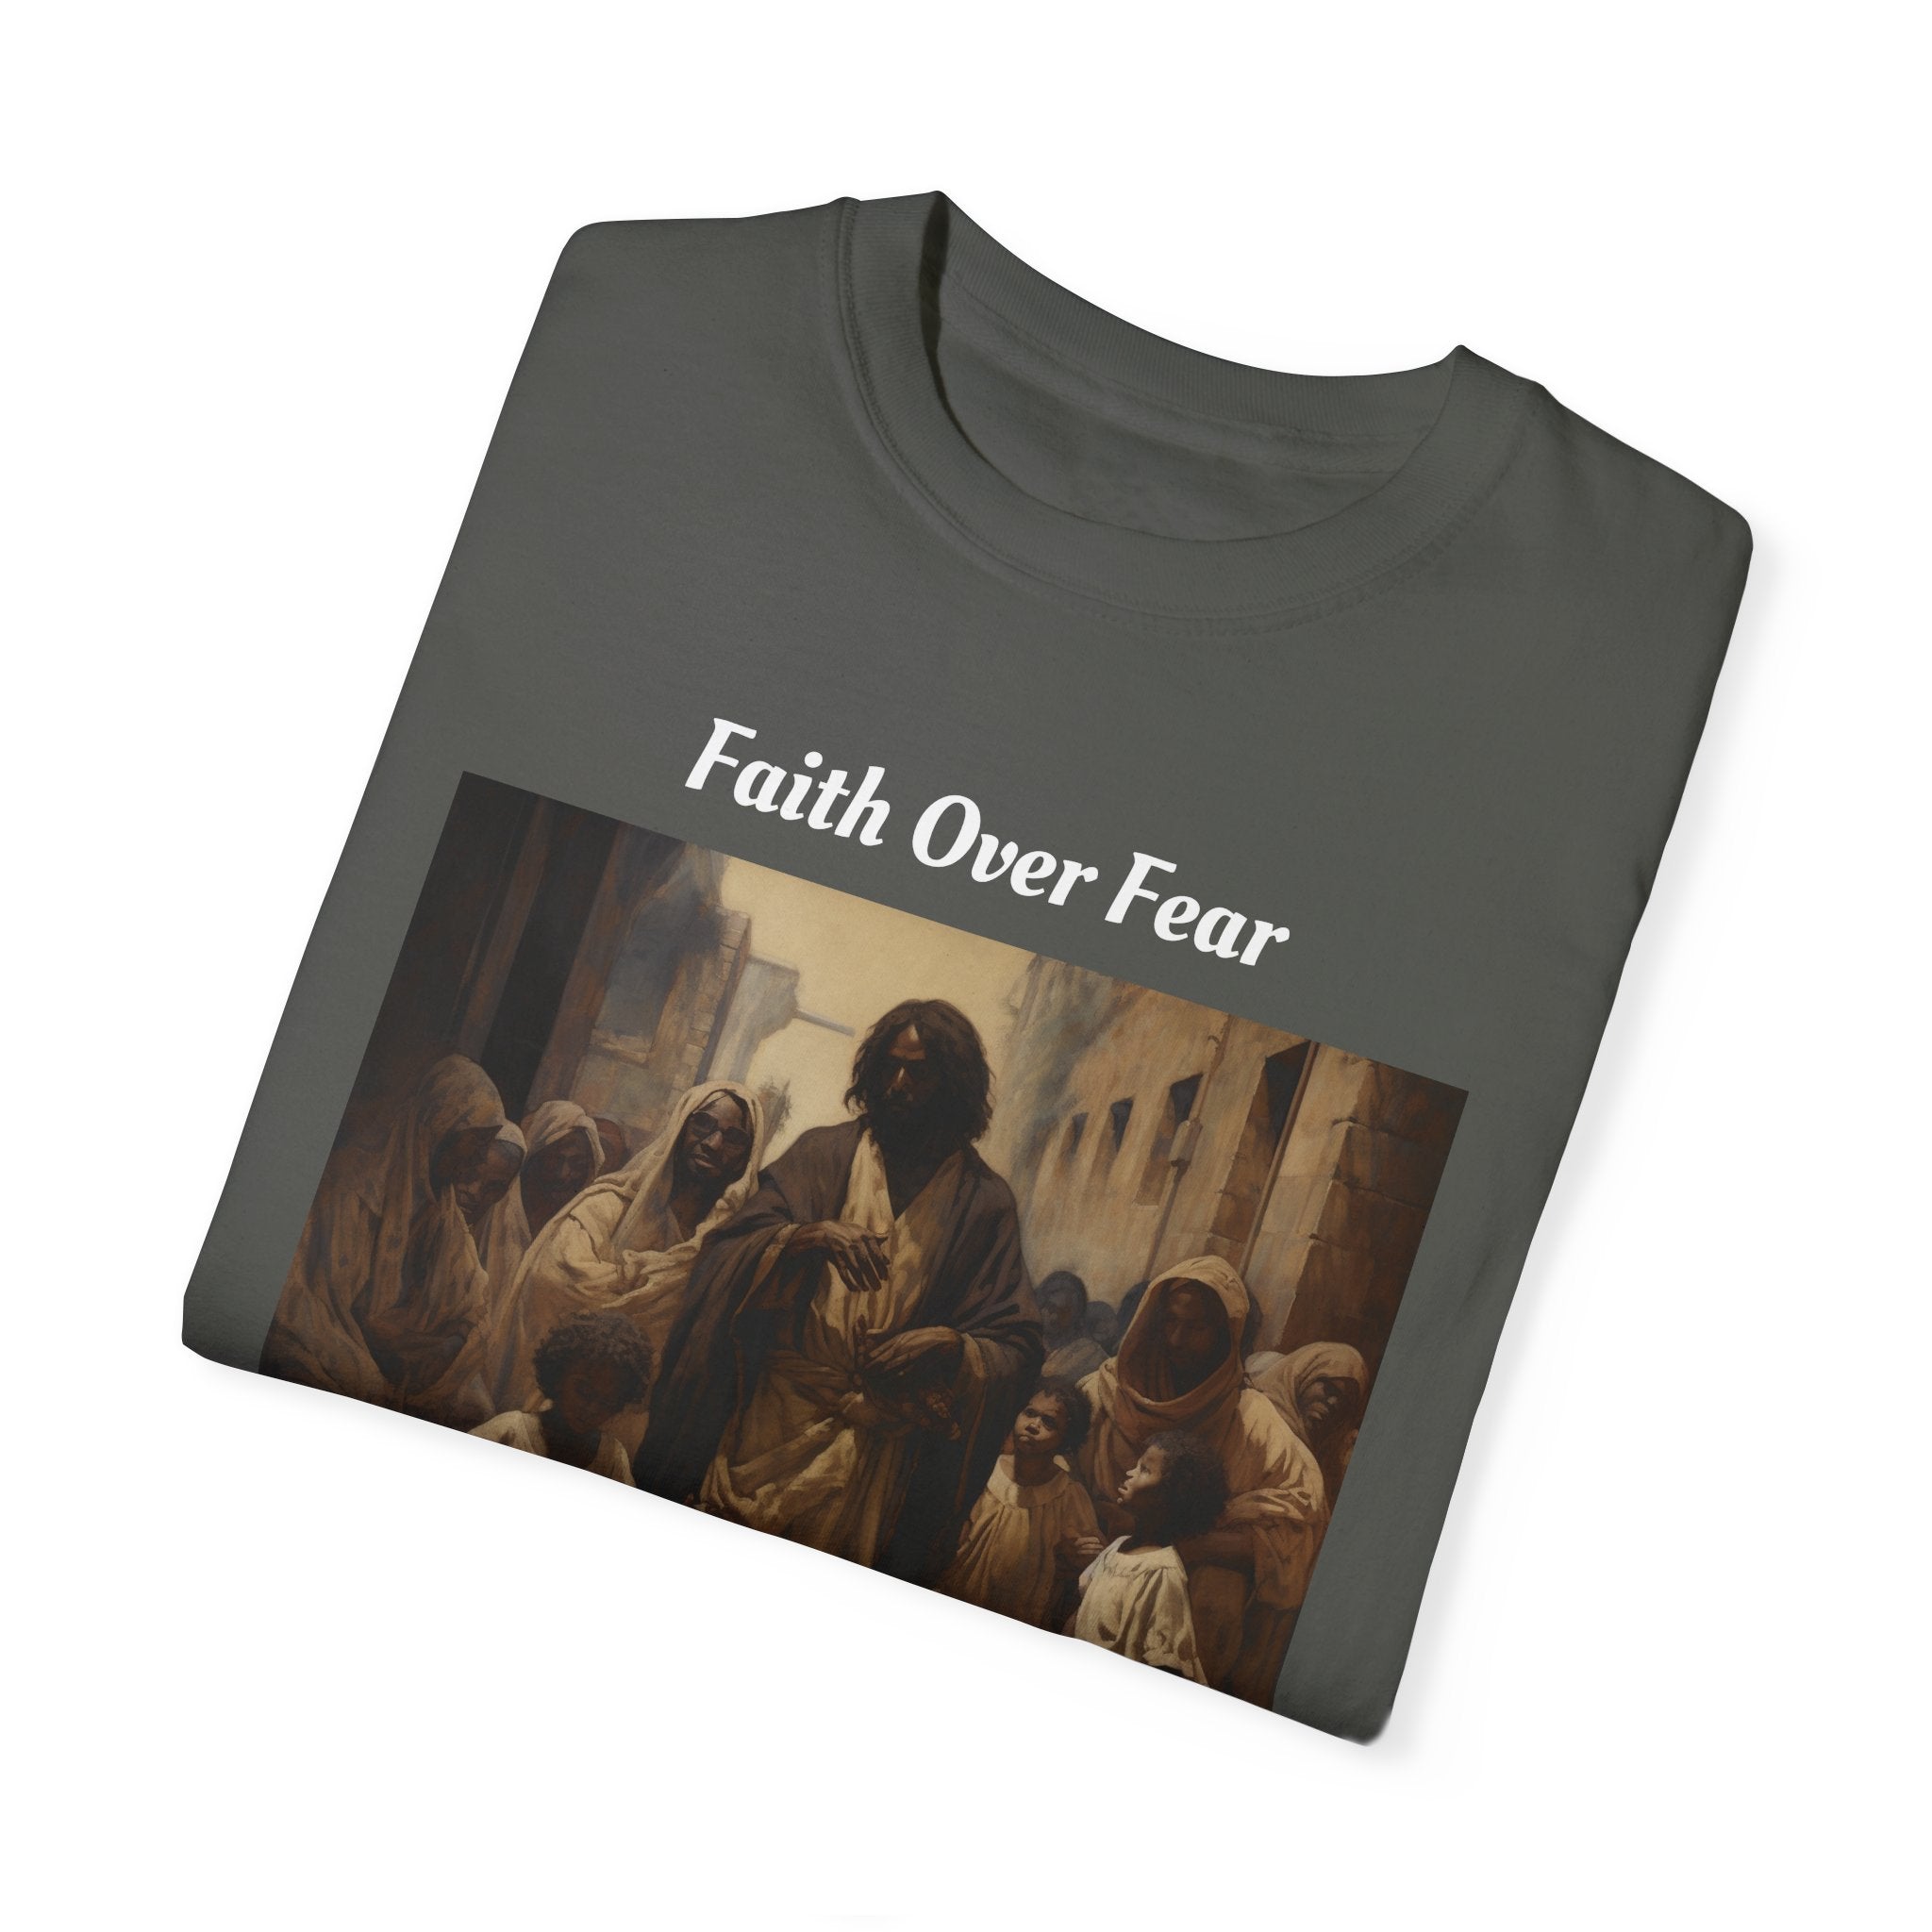 "Faith Over Fear" Unisex Garment-Dyed T-shirt: Dive Deep into Spiritual Gratitude and Stylish Comfort with Our Faith-Inspired Wardrobe Essential